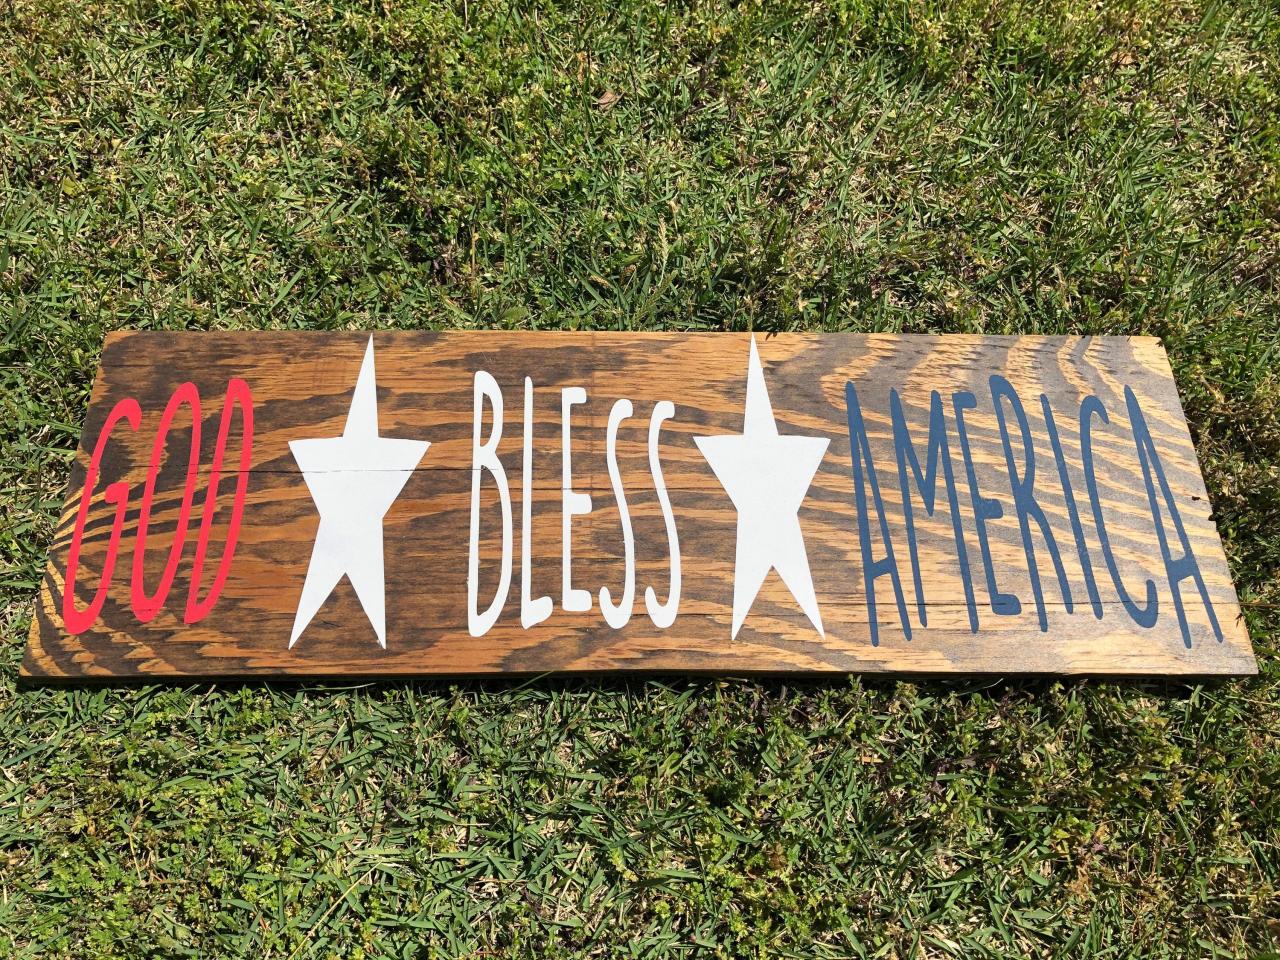 God Bless America 8x24 Hand Painted Wood Sign.